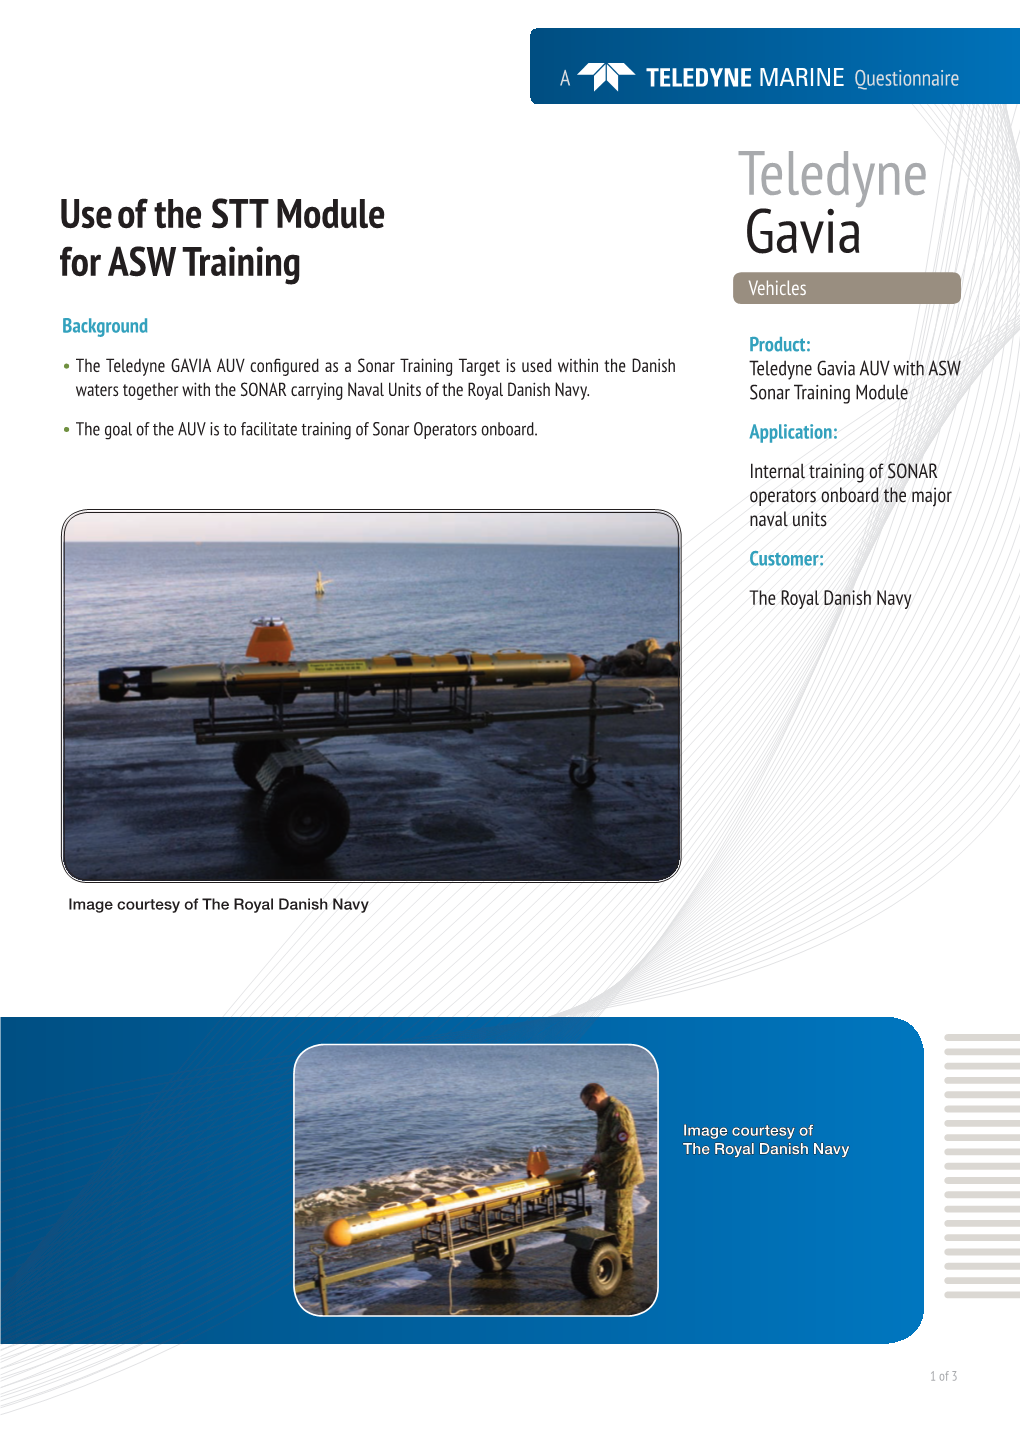 Use of the STT Module for ASW Training